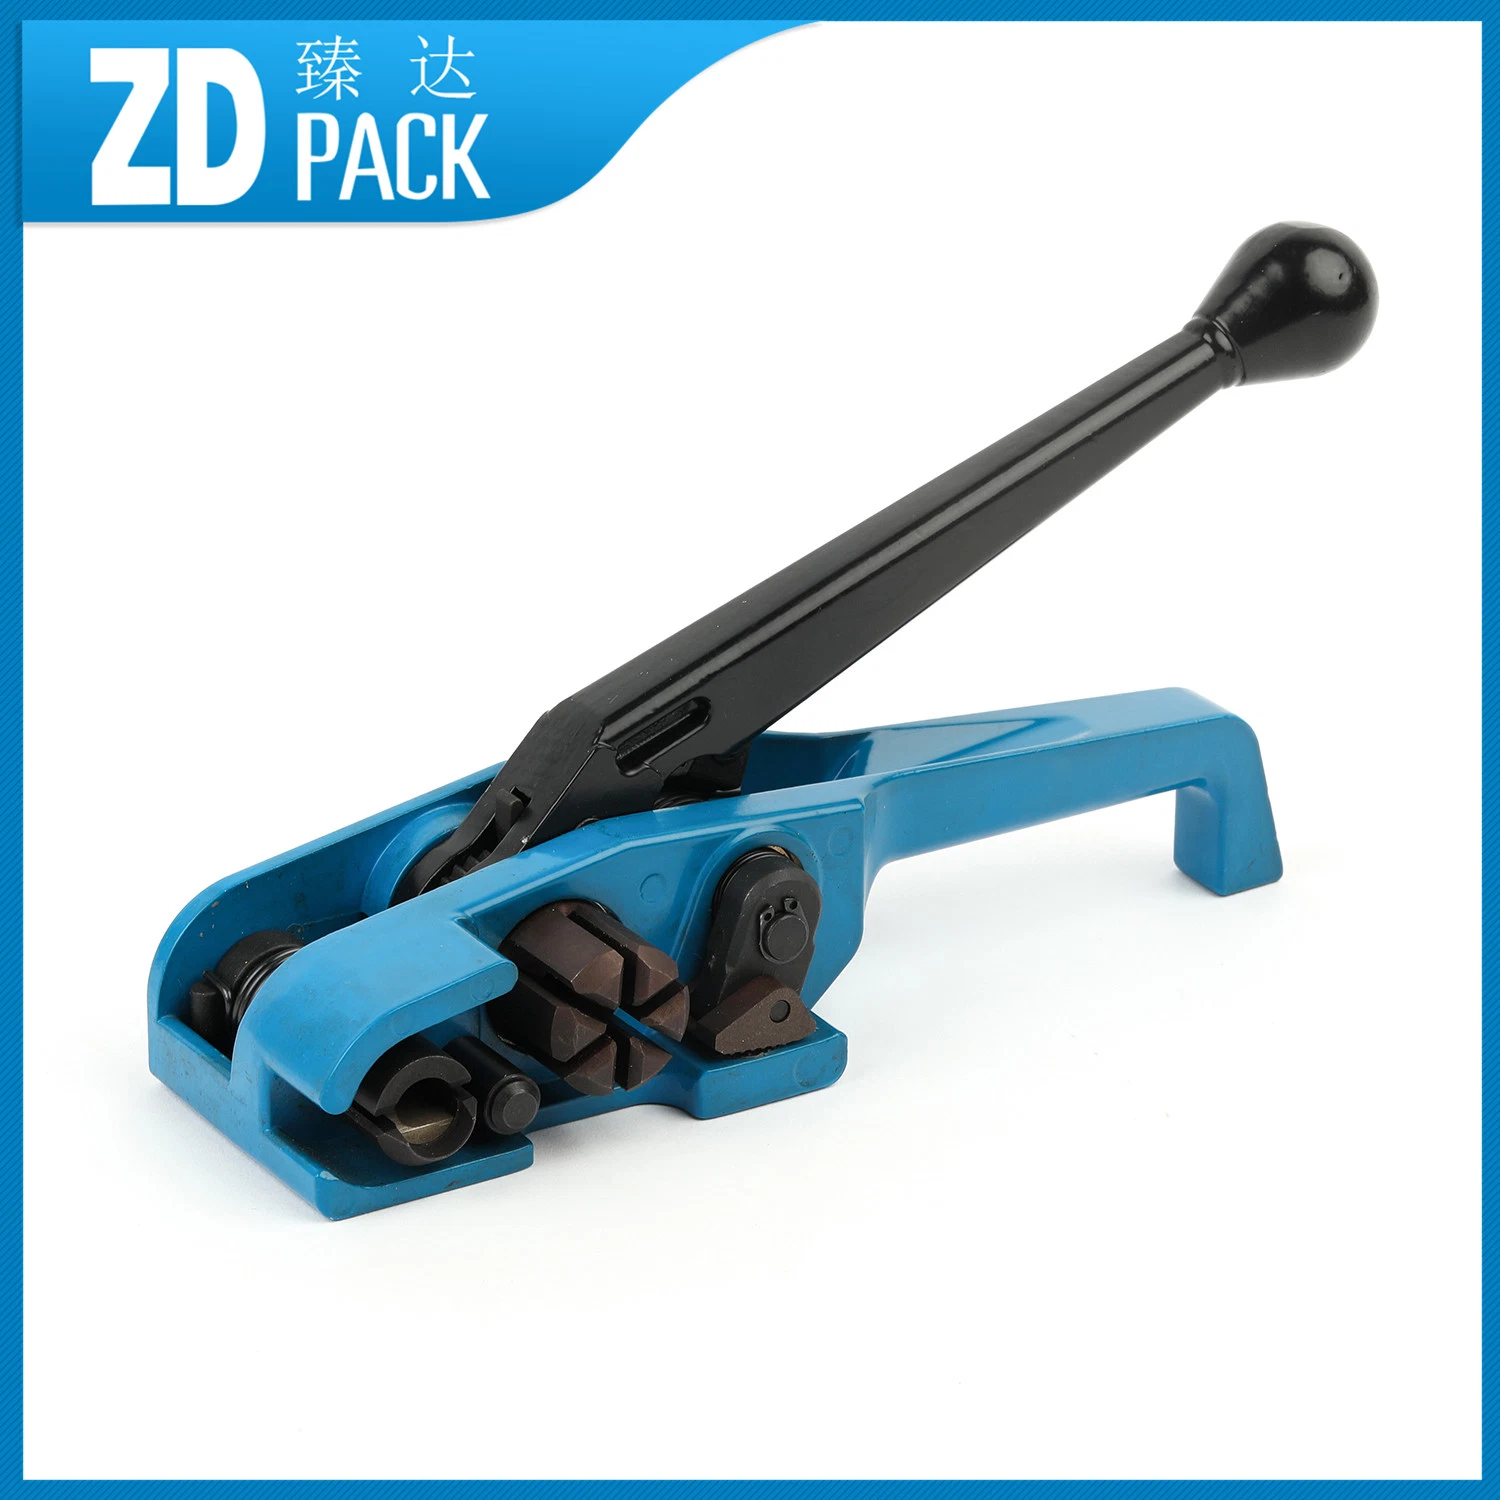 Hand Manual Pet Strapping Tool with Great Power (B318)